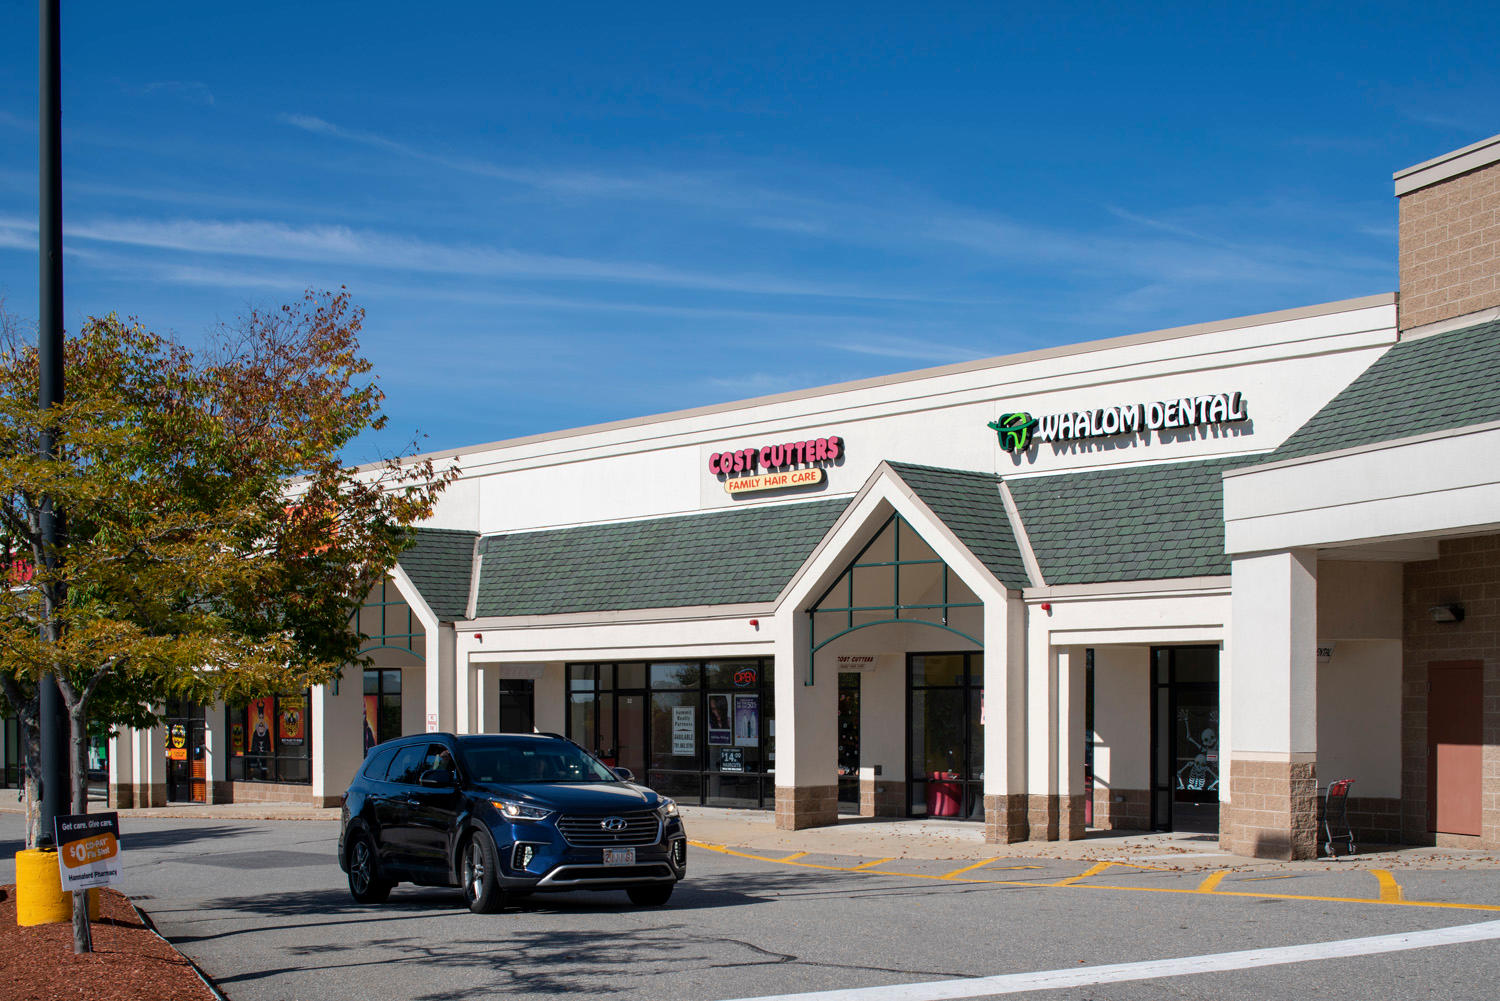 Cost Cutters and Whalom Dental at Lunenburg Crossing Shopping Center